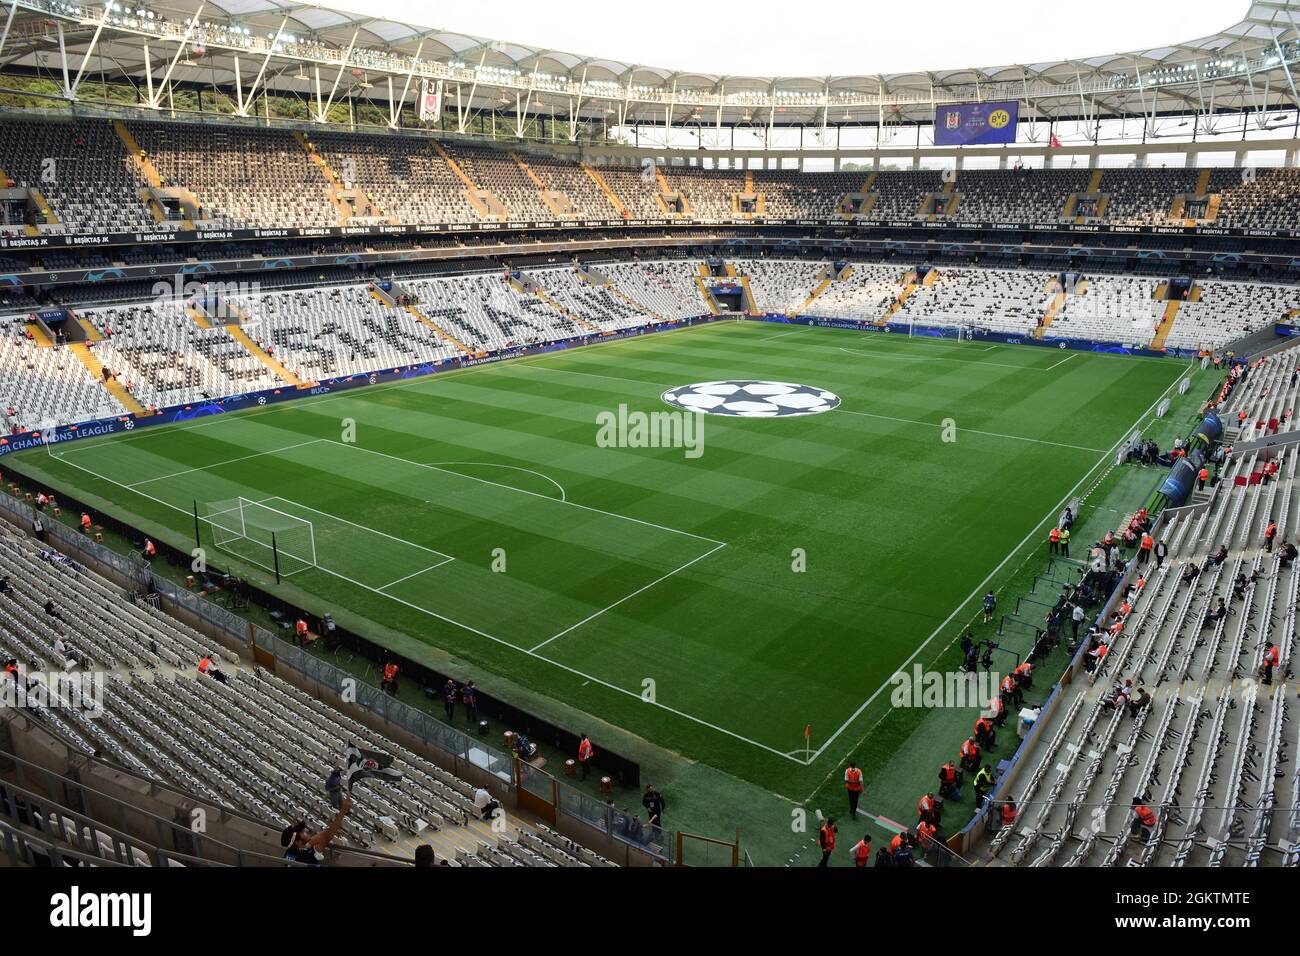 Istanbul Turkey 15th Sep 21 Football Champions League Besiktas Istanbul Borussia Dortmund Group Stage Group C Matchday 1 Vodafone Arena Istanbul View Into The Arena Before The Start Of The Match